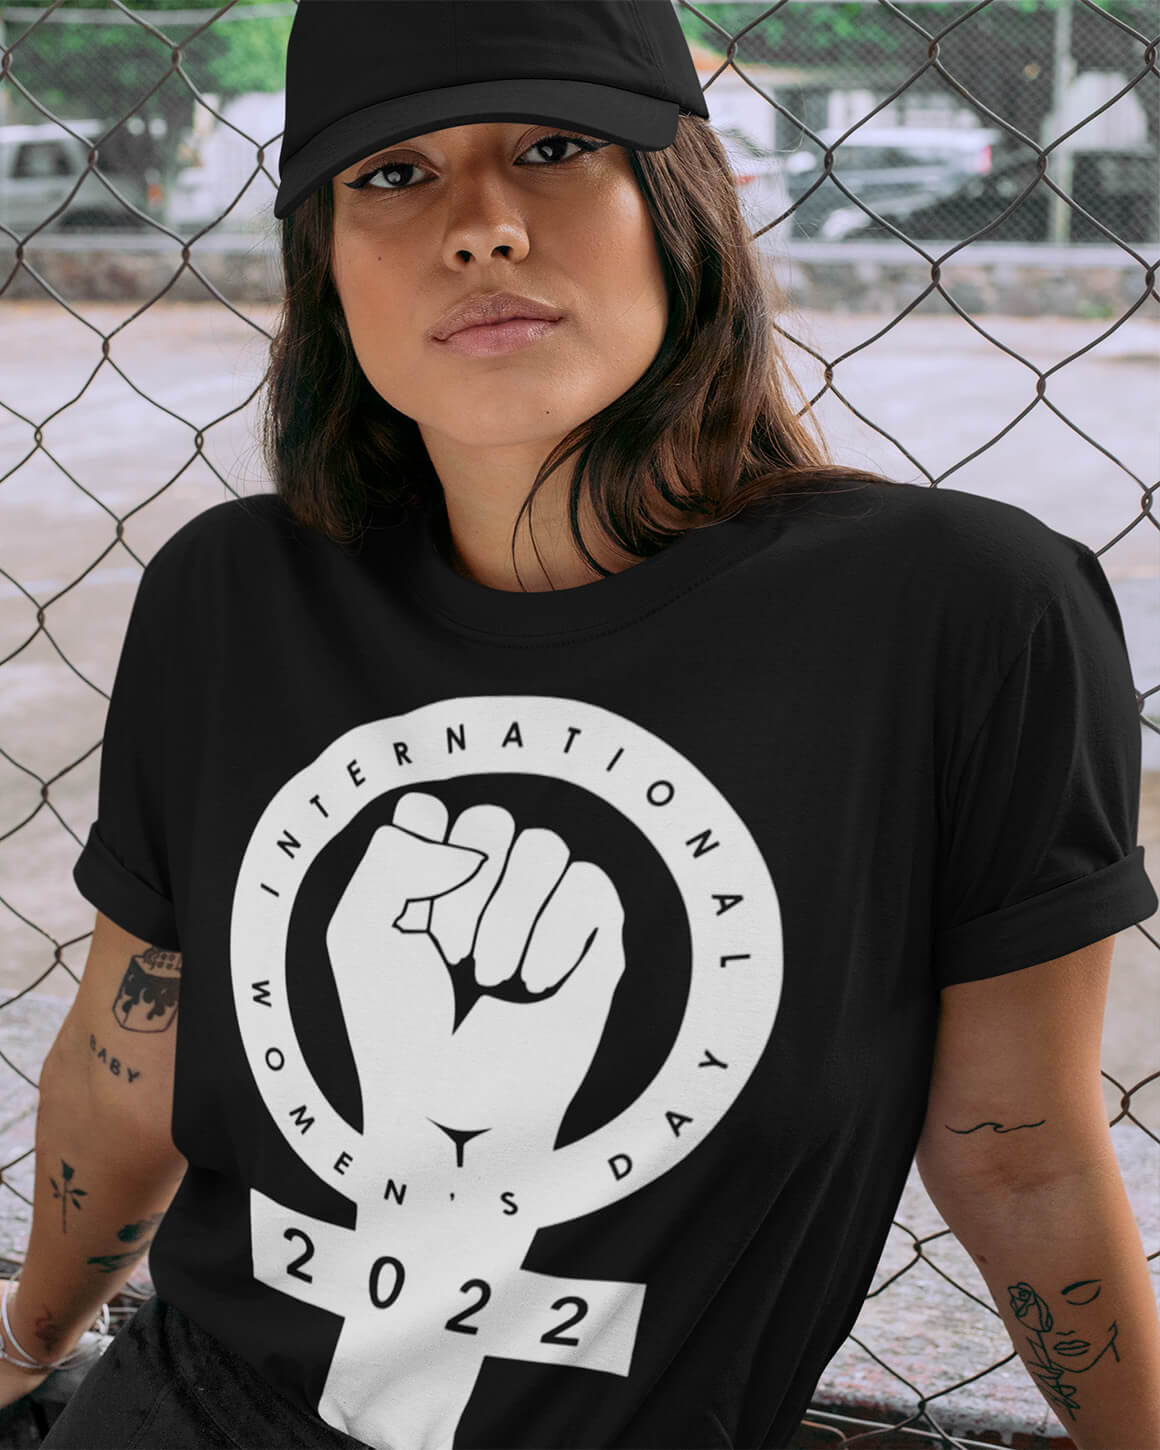 Cozy black t-shirt with a venus symbol and a raised fist for feminism